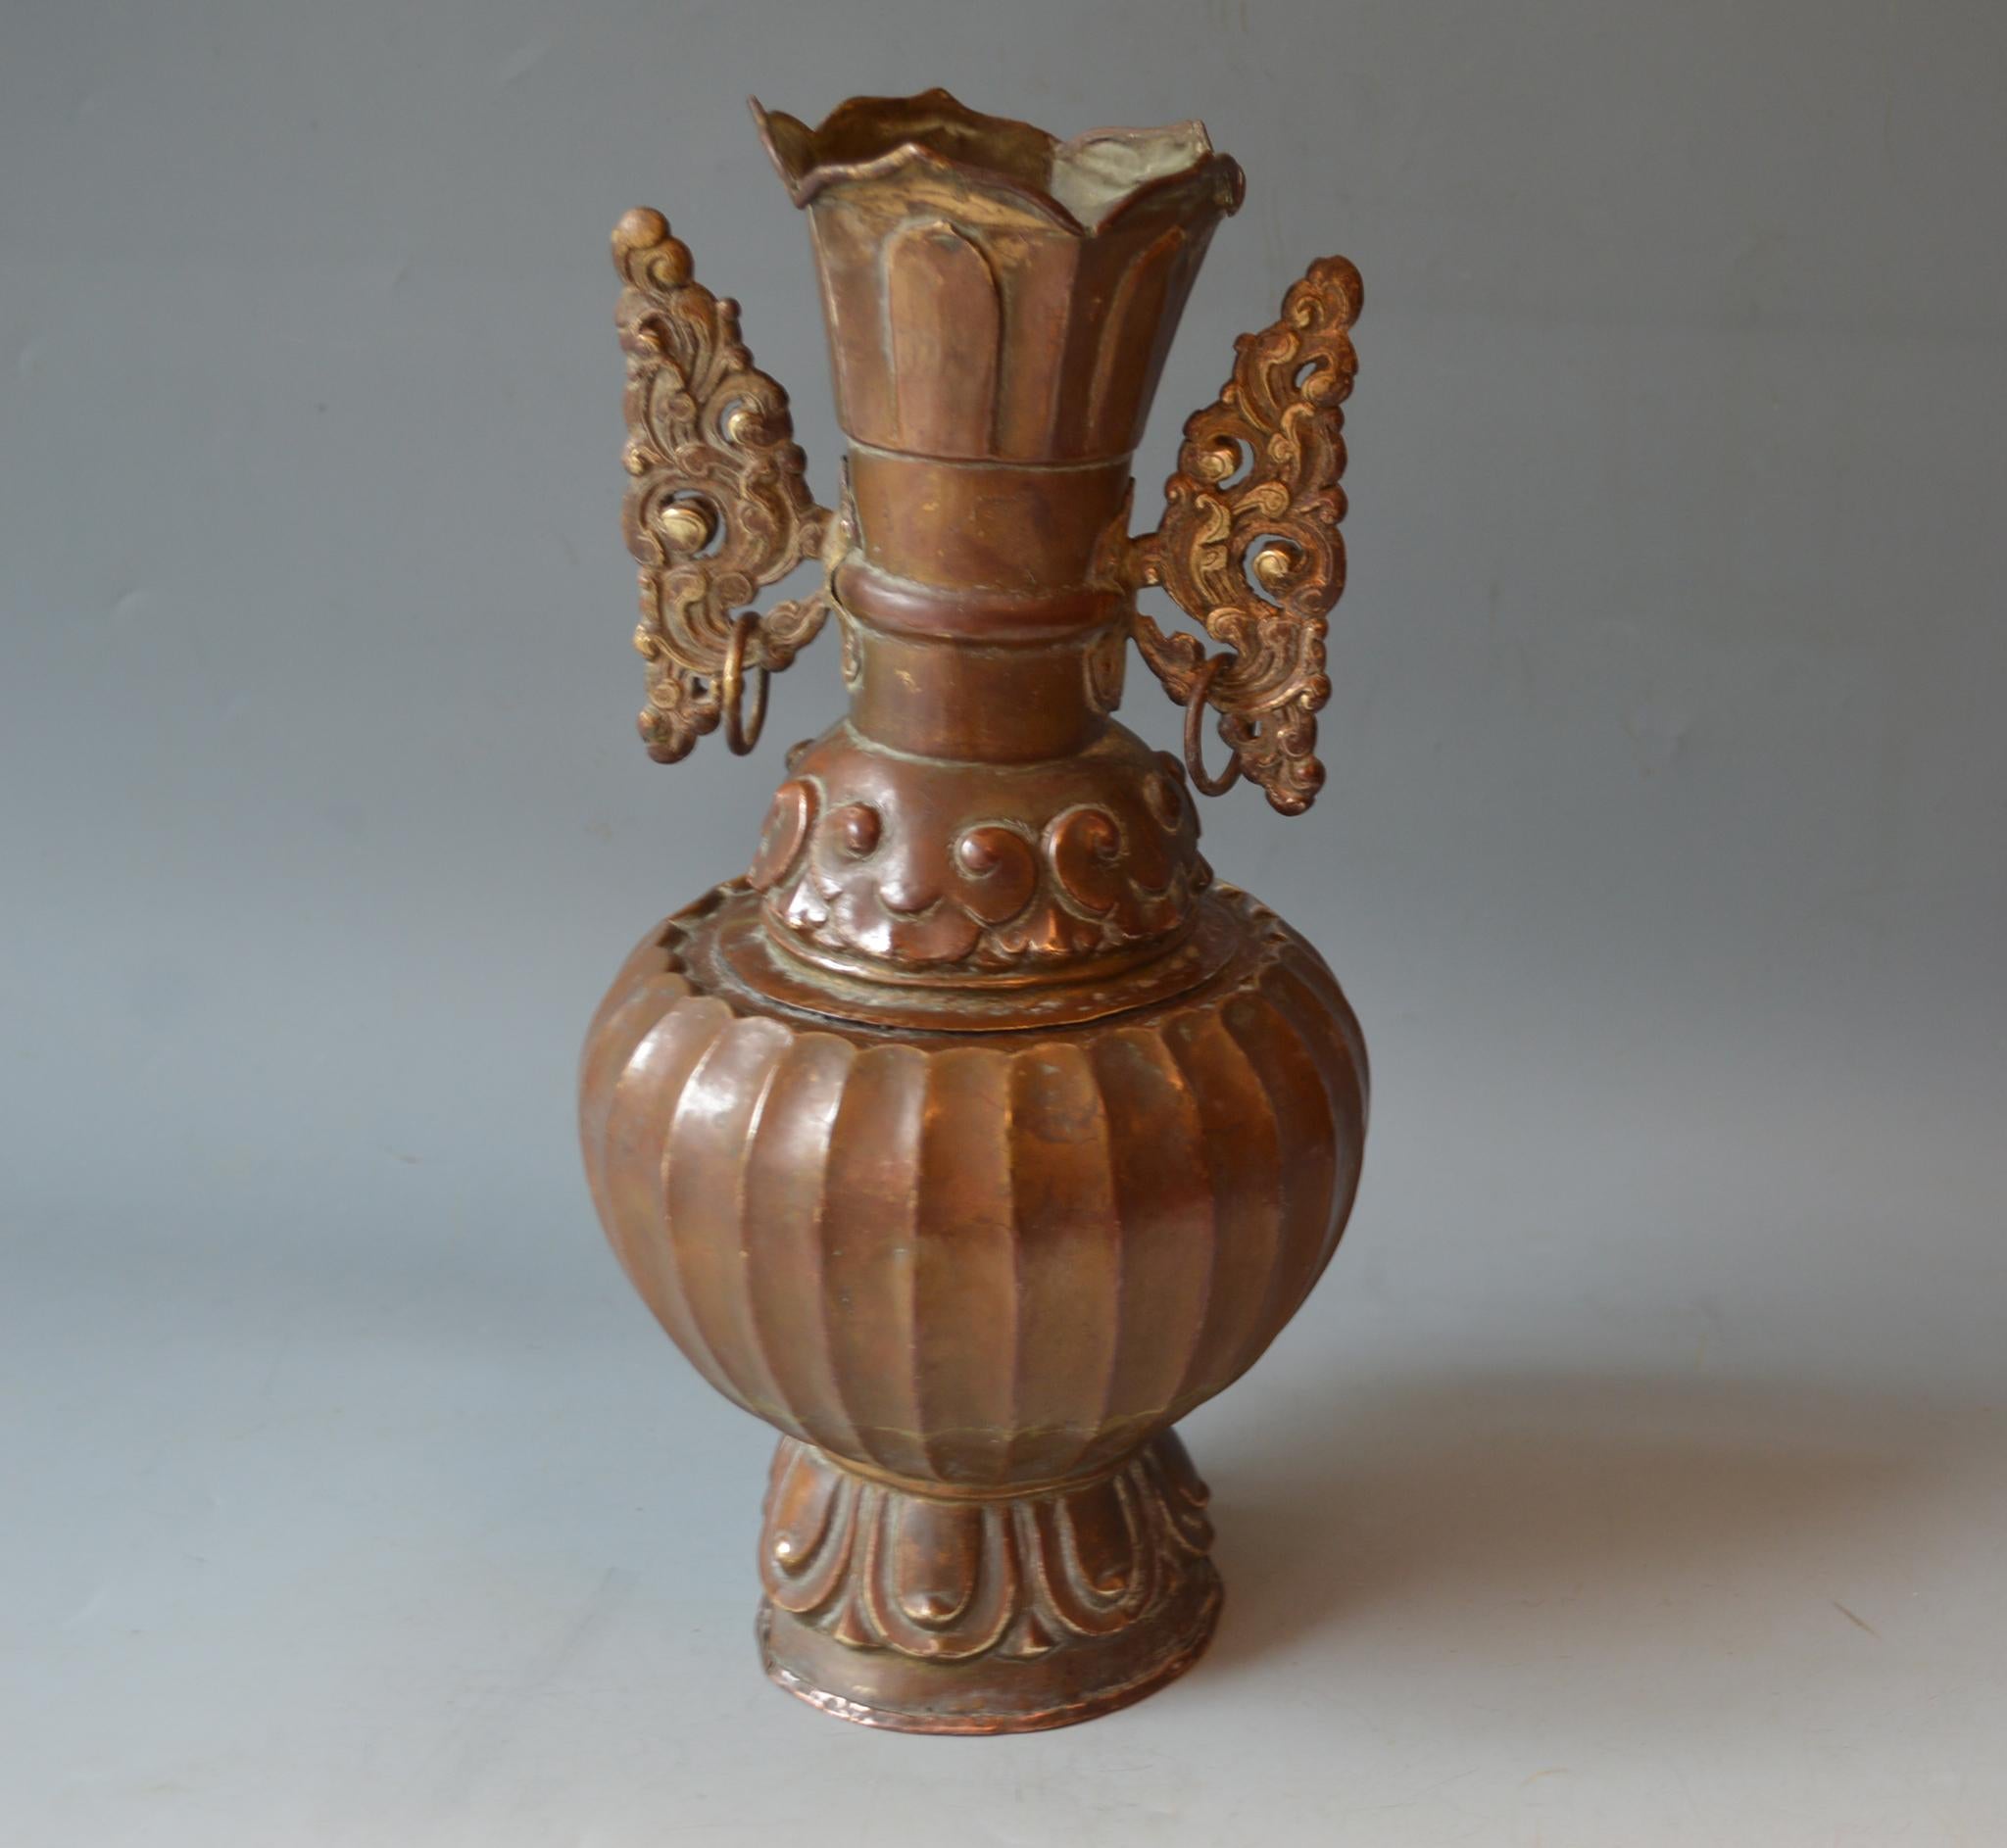  
A fine Antique Mongolian Buddhist Vase in copper with Brass decoration with moving circular top piece

Period 19th century
Condition : Minor damages to base